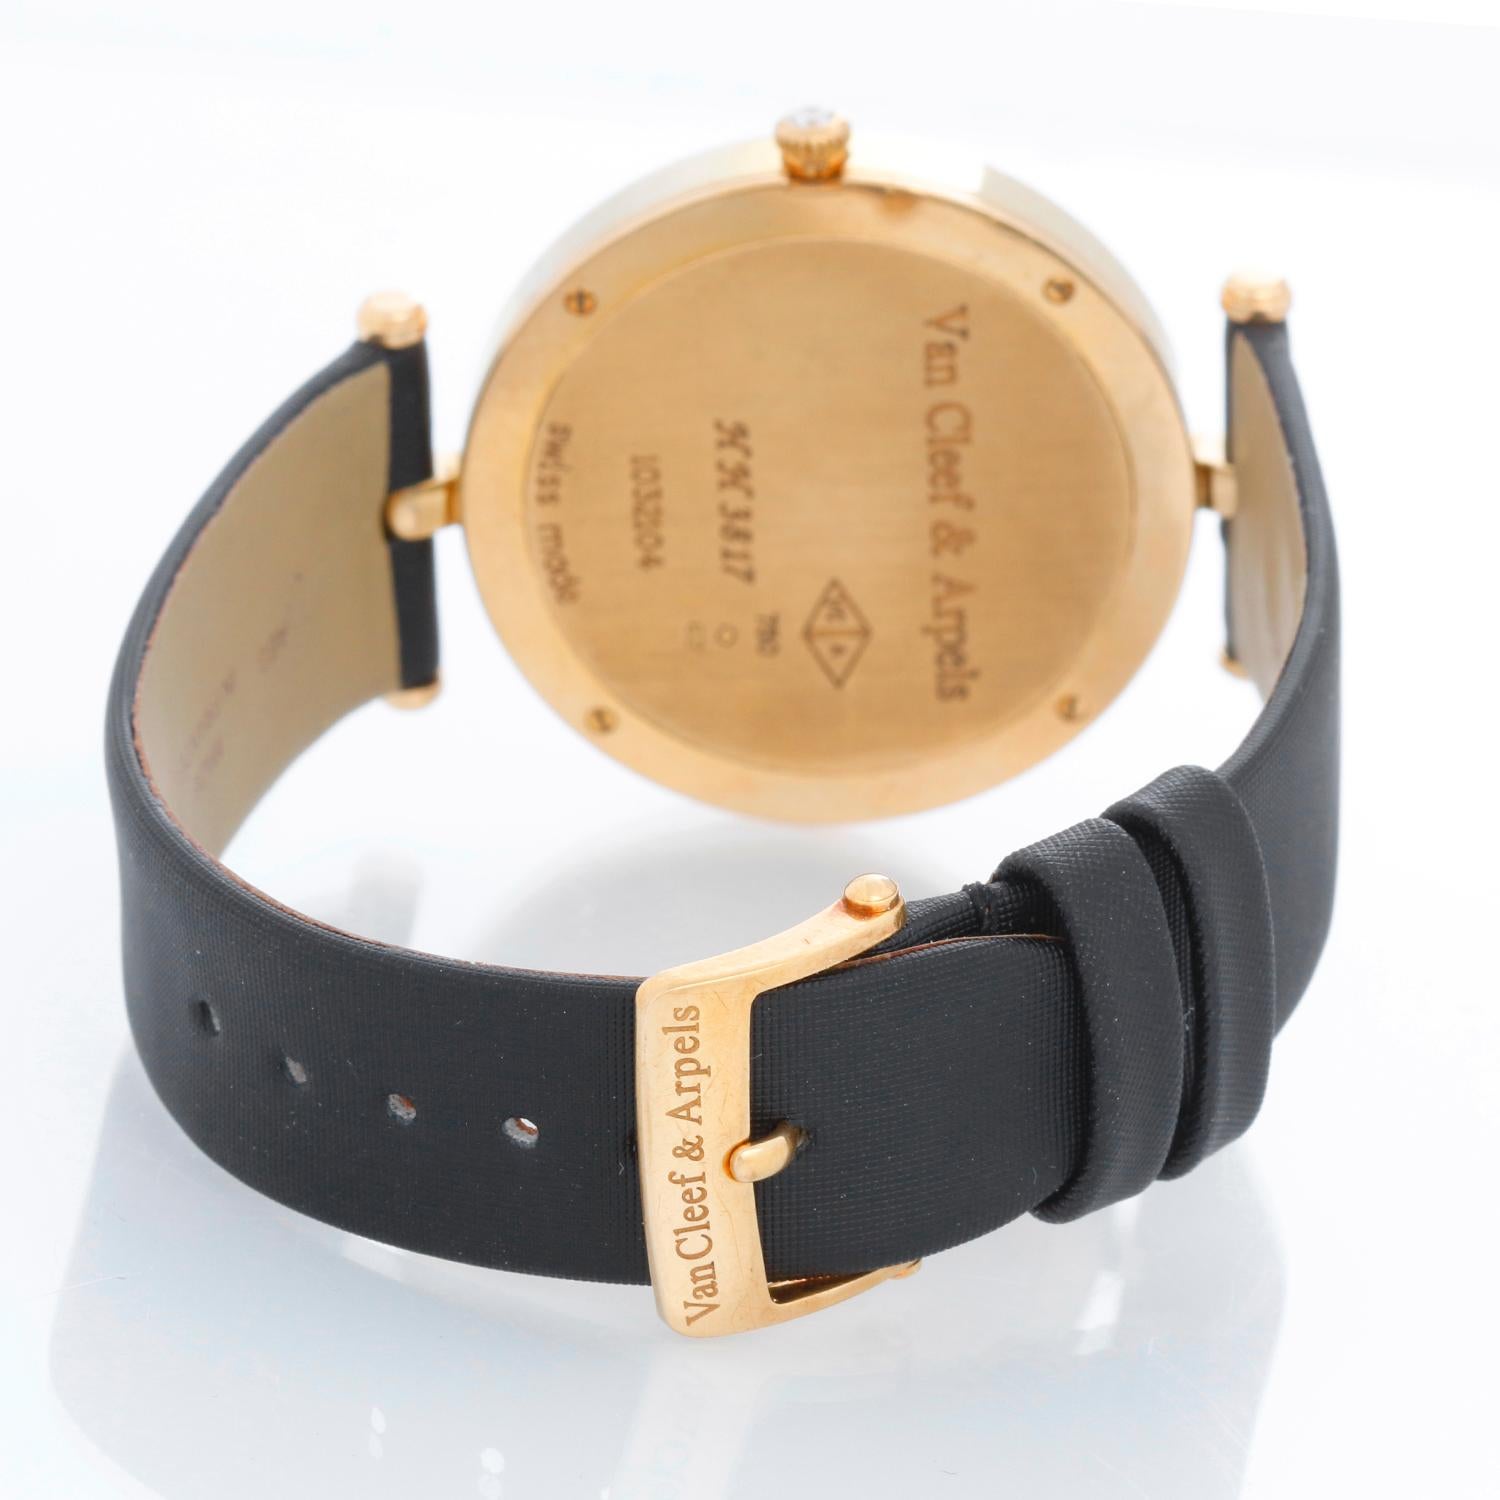 papillon watch price in india